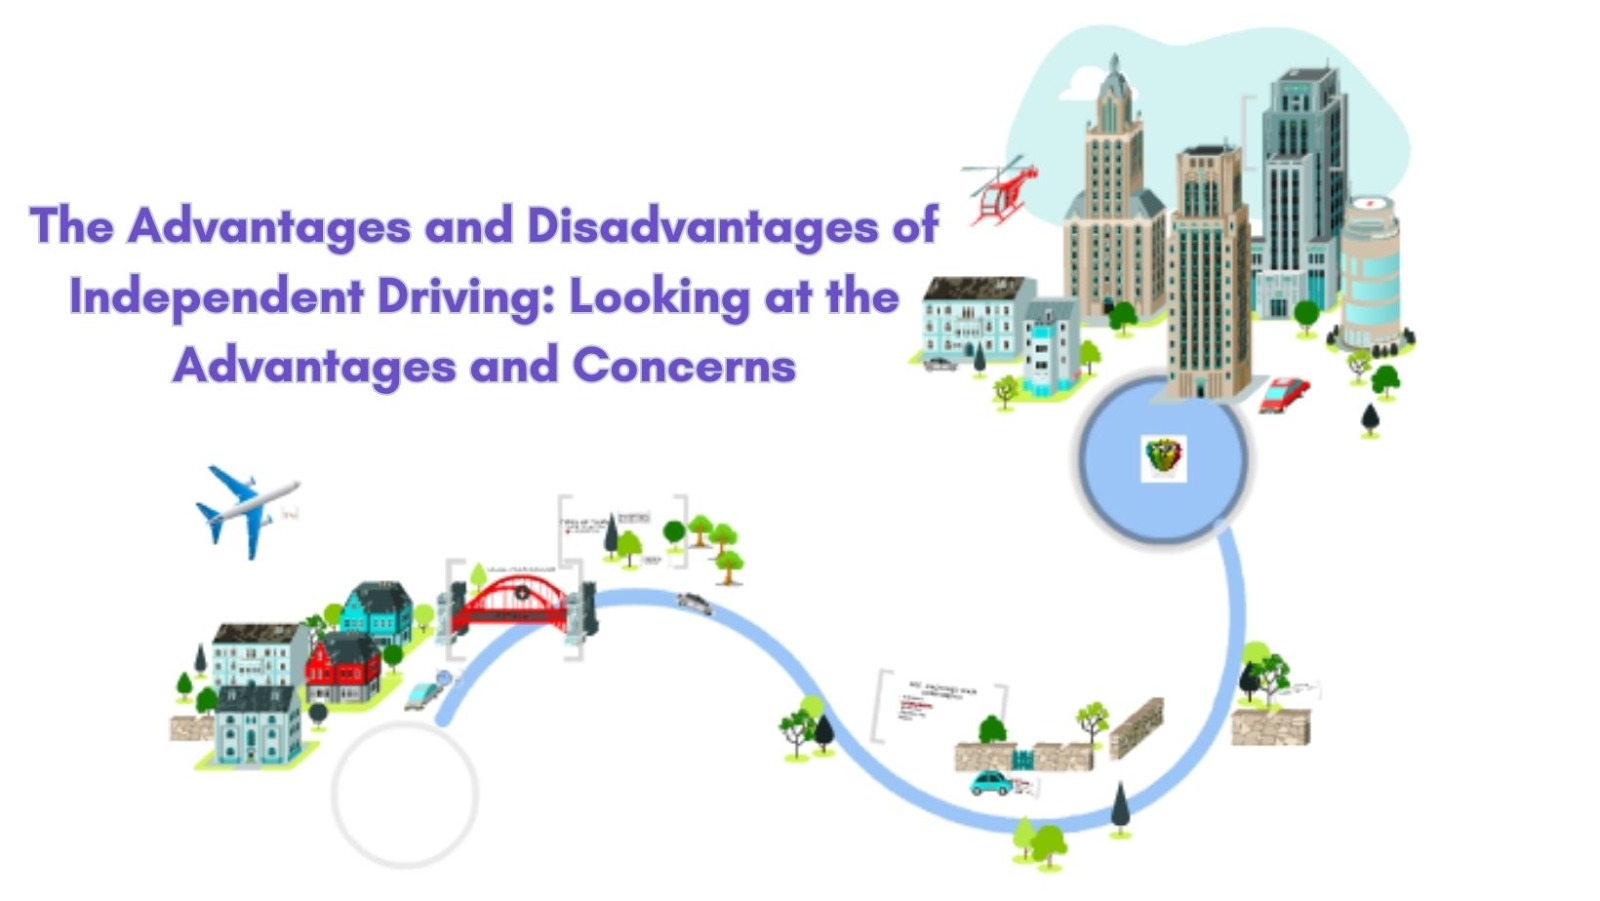 The Advantages and Disadvantages of Independent Driving: Looking at the Advantages and Concerns